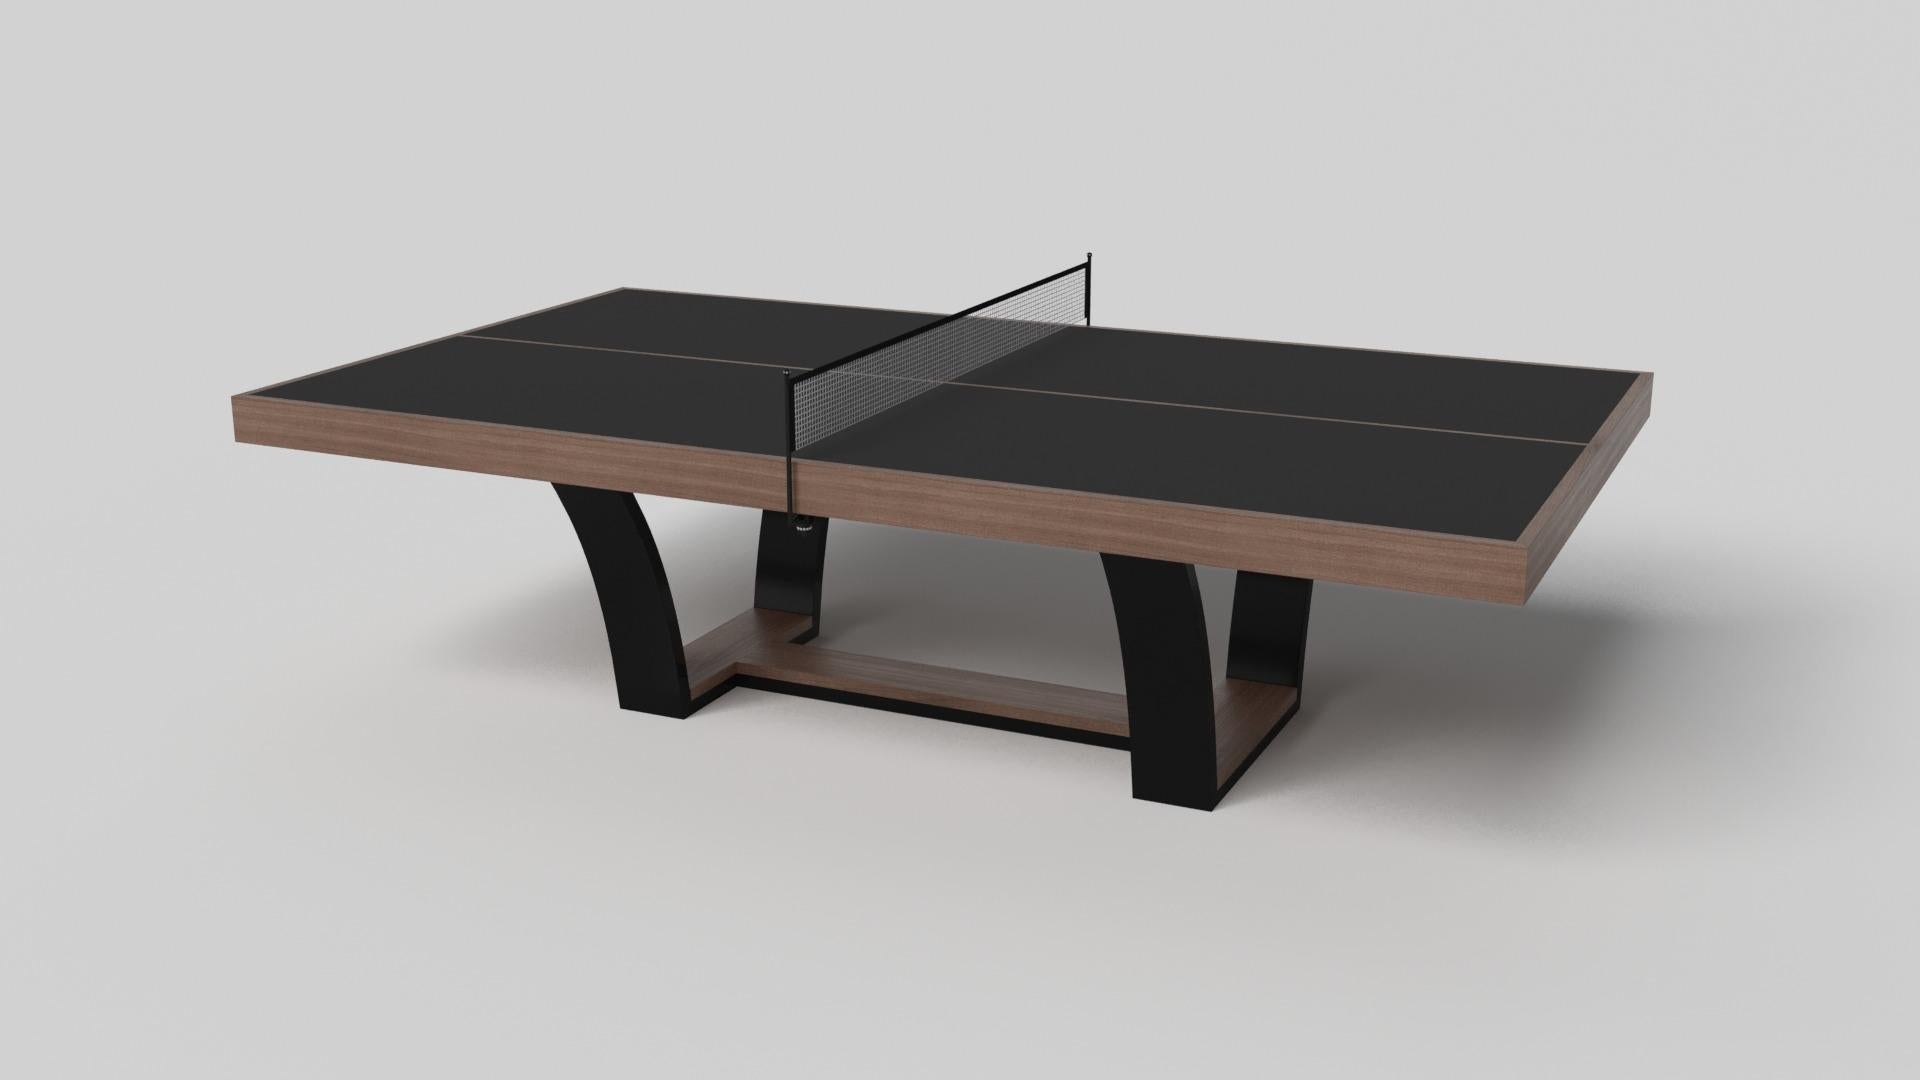 With an I-shaped metal base, slightly sloped metal legs, and a contrasting wood top, the Elite table tennis table exudes modern sophistication while evoking a sense of art deco design. This table is a confluence of style, made to meet today's